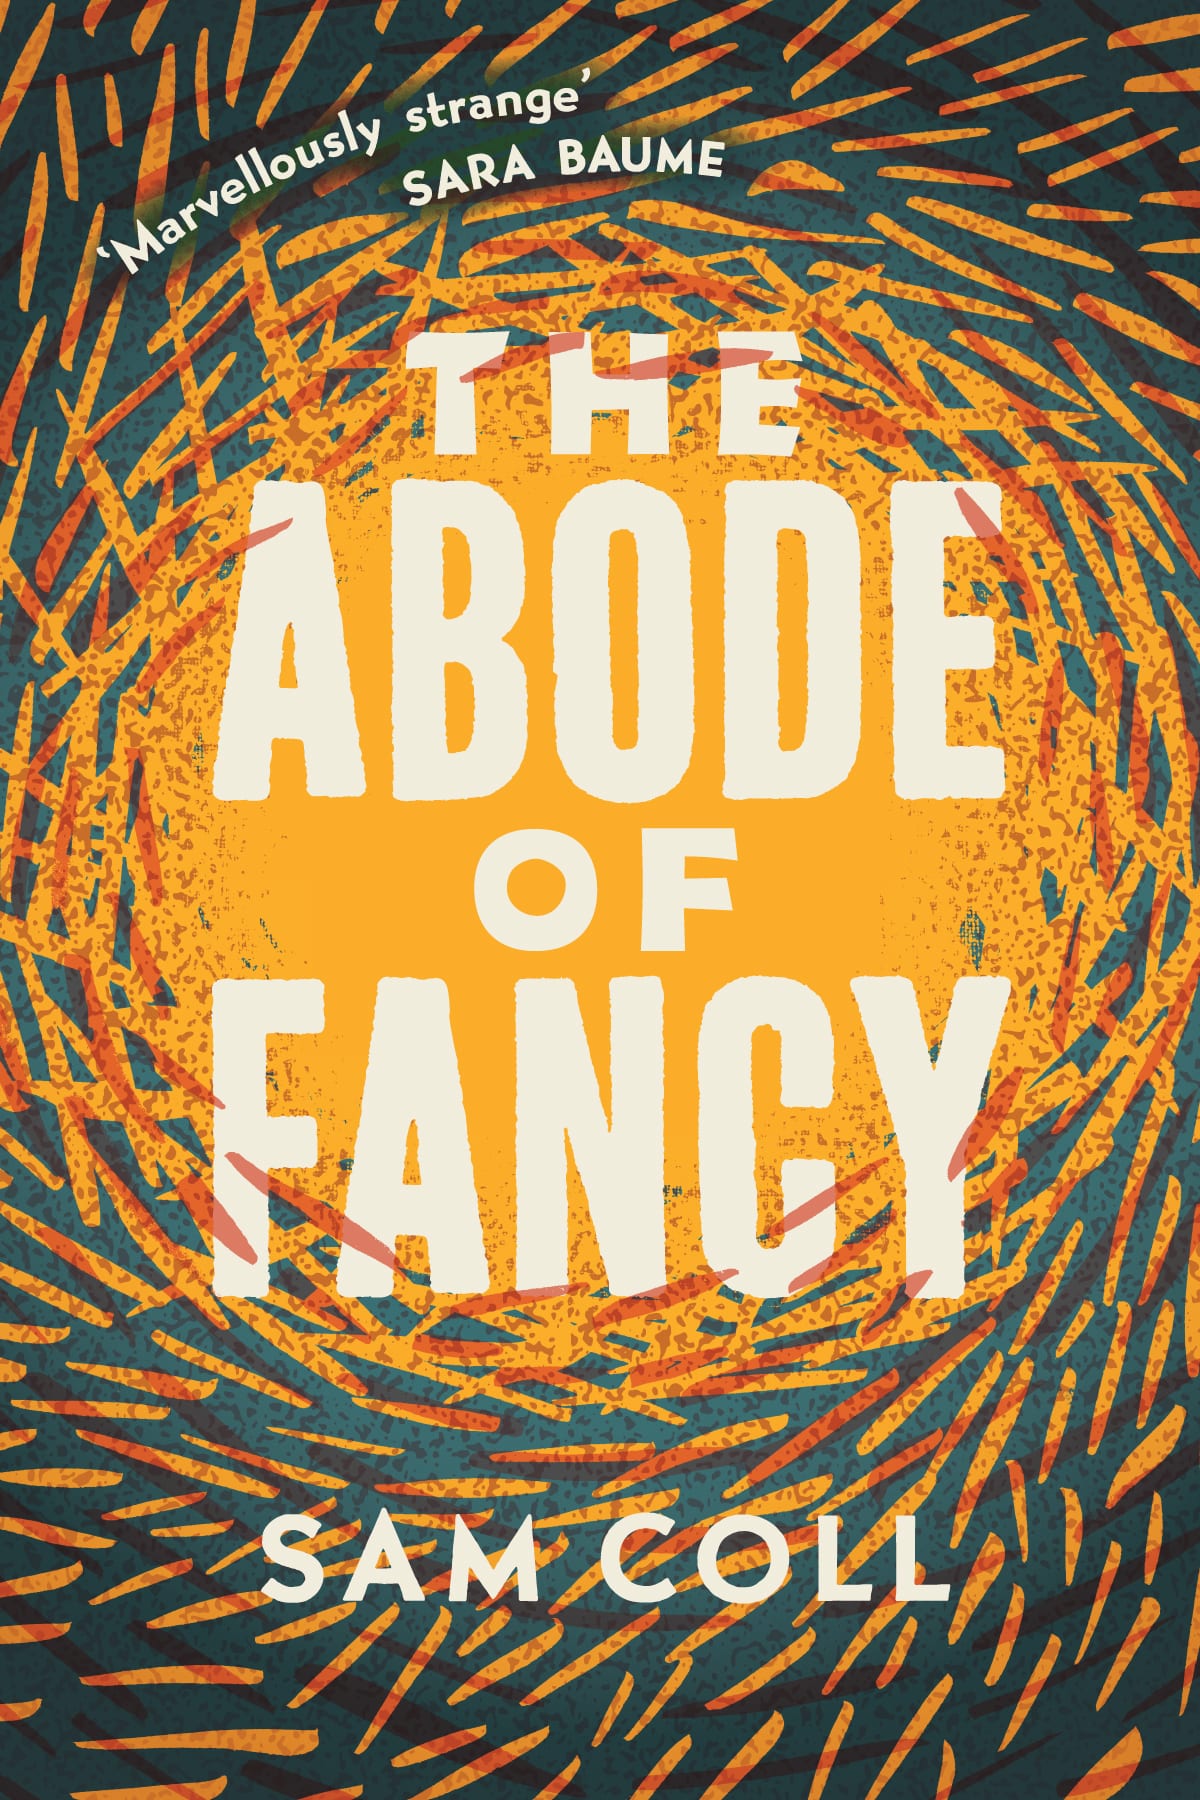 The Abode of Fancy by Sam Coll Book Cover